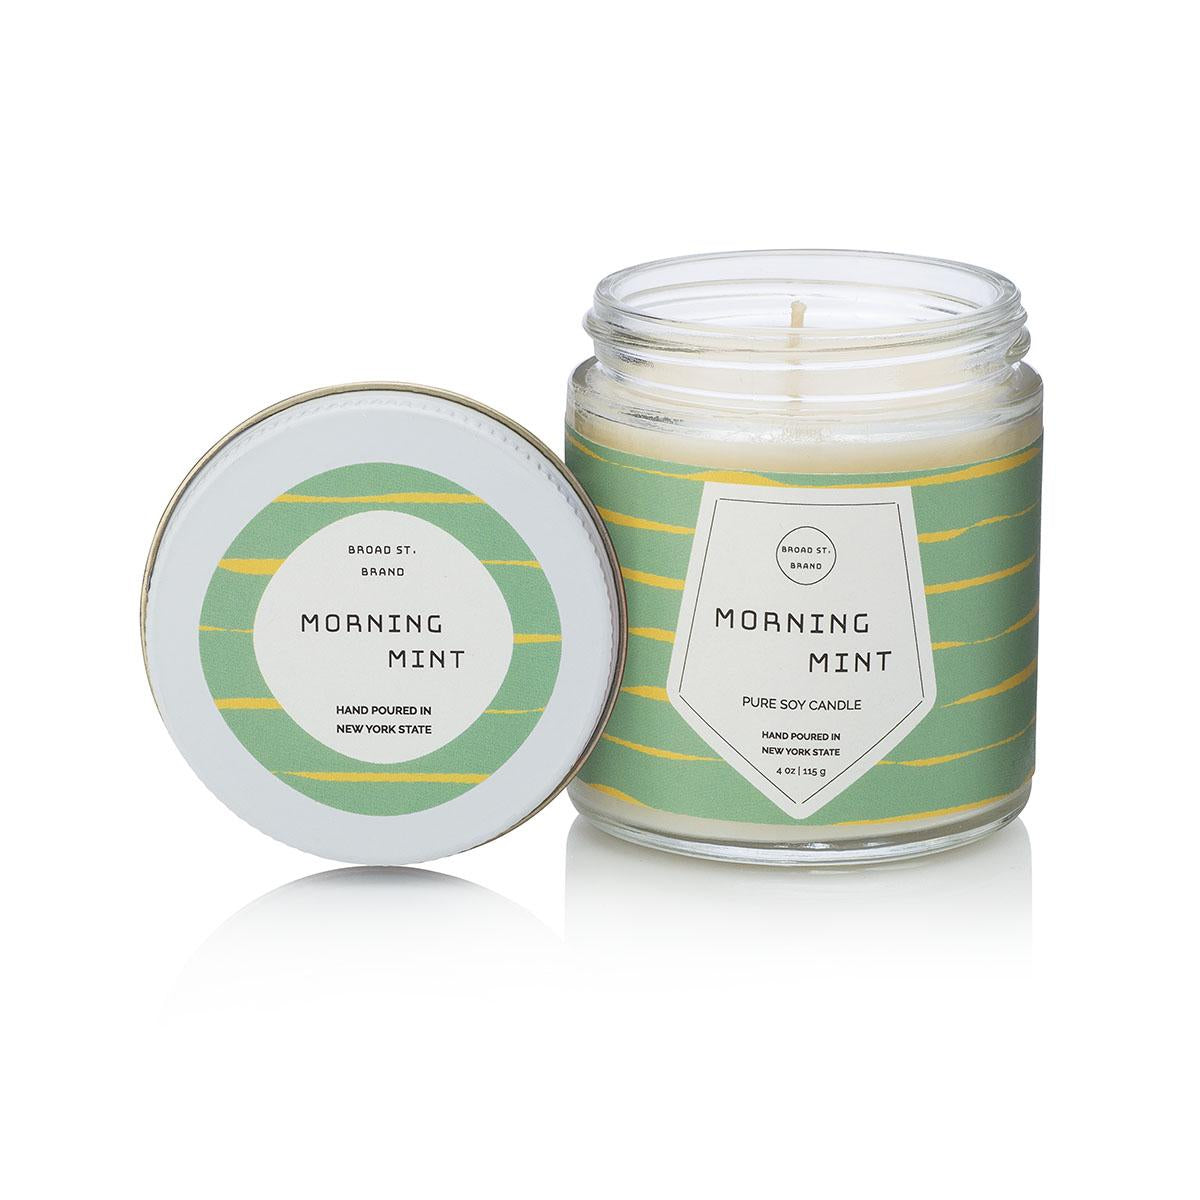 Primary image of Morning Mint Pure Soy Candle